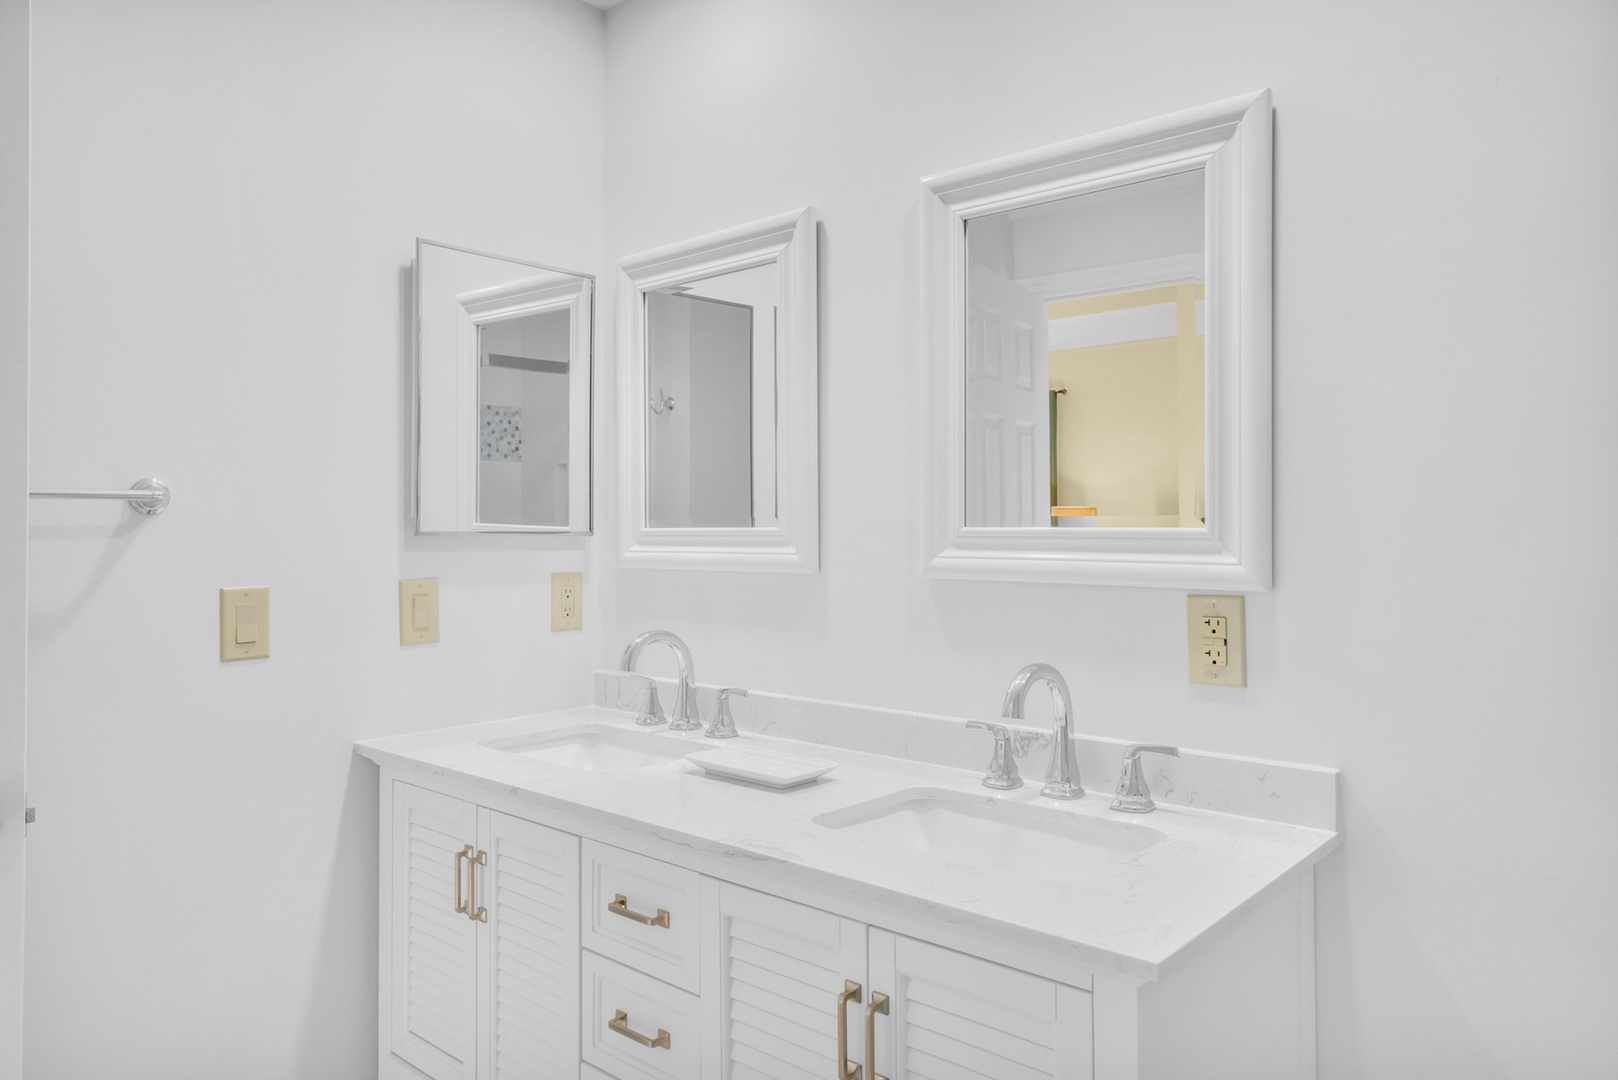 The private ensuite offers a double vanity & glass walk-in shower